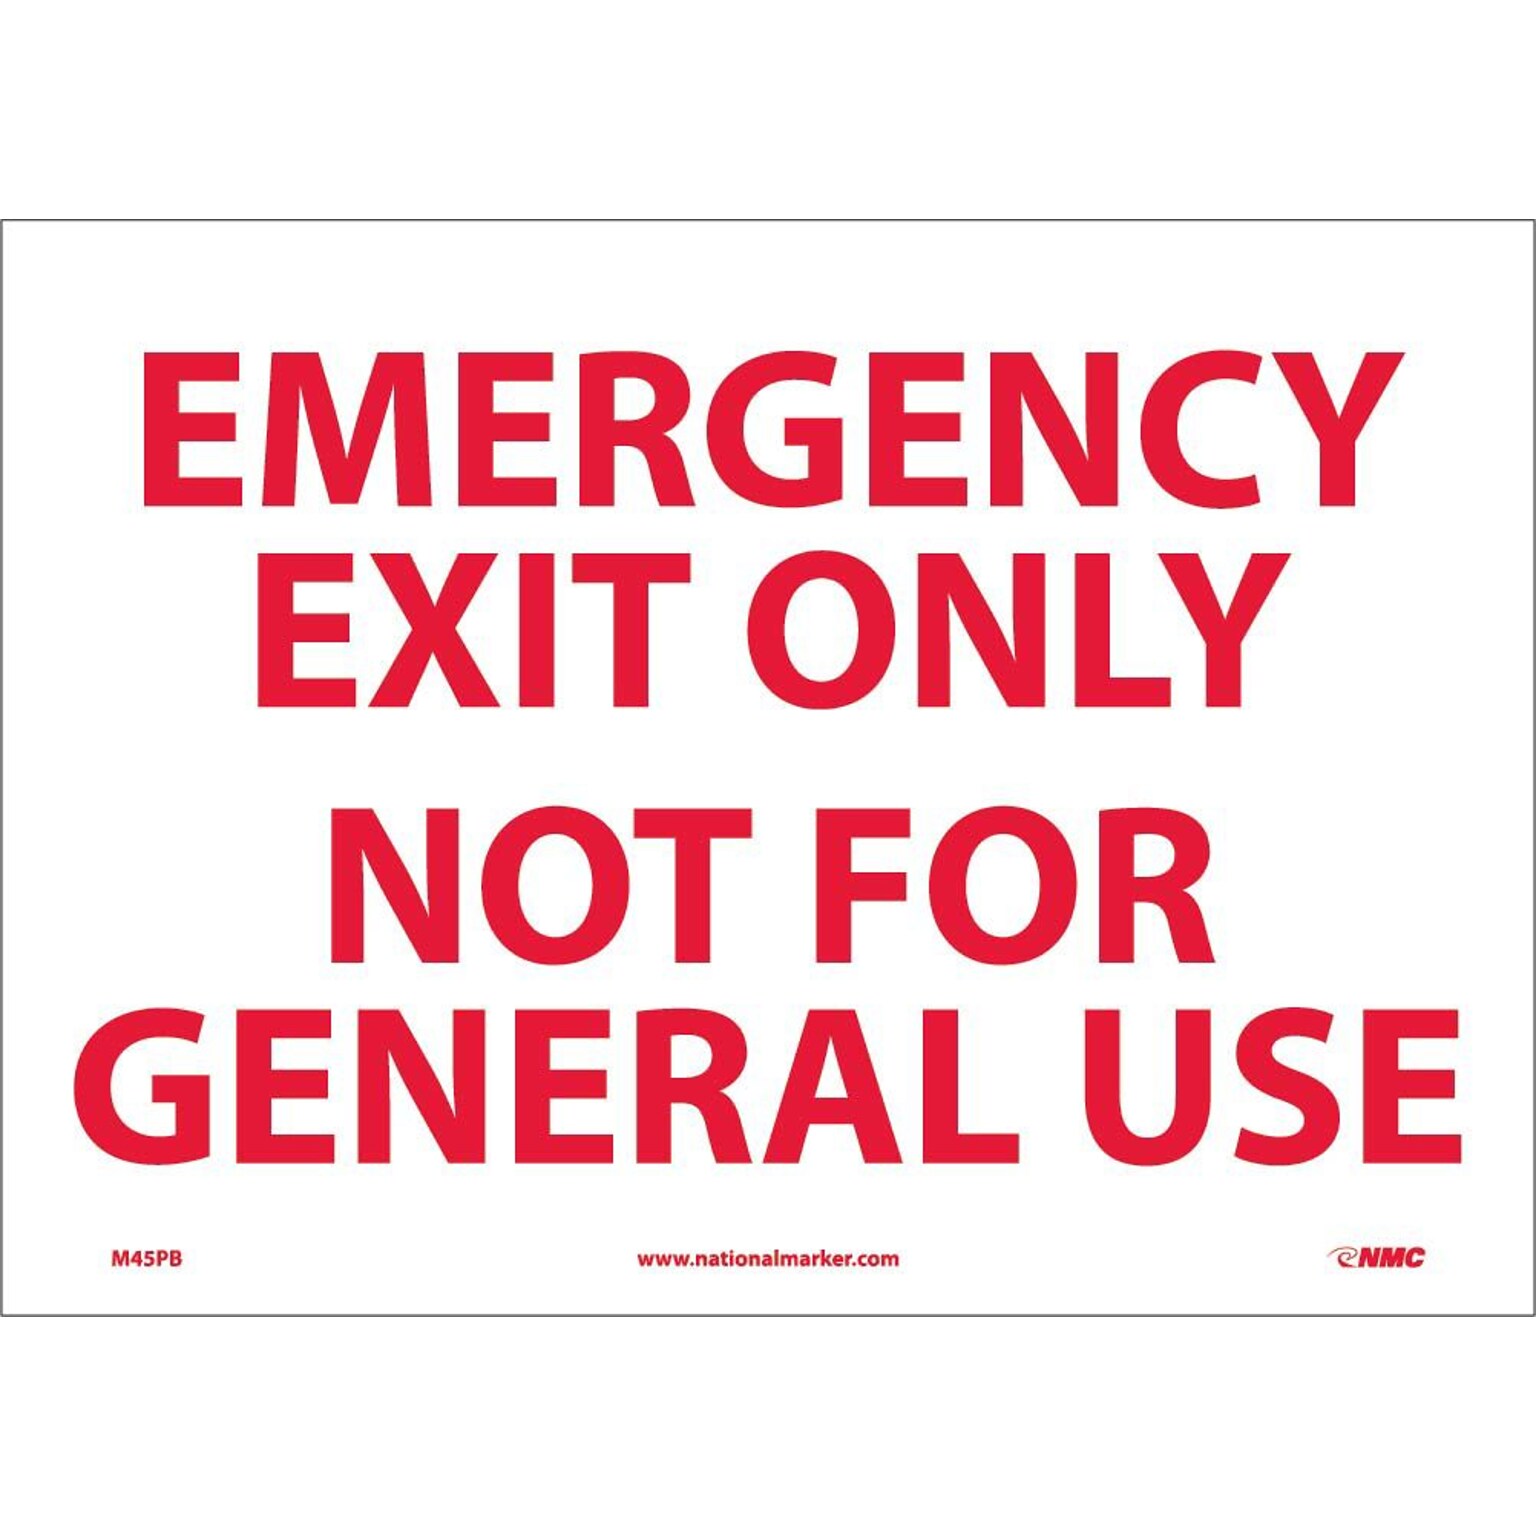 Information Labels; Emergency Exit Only Not For General Use, 10 x 14, Adhesive Vinyl